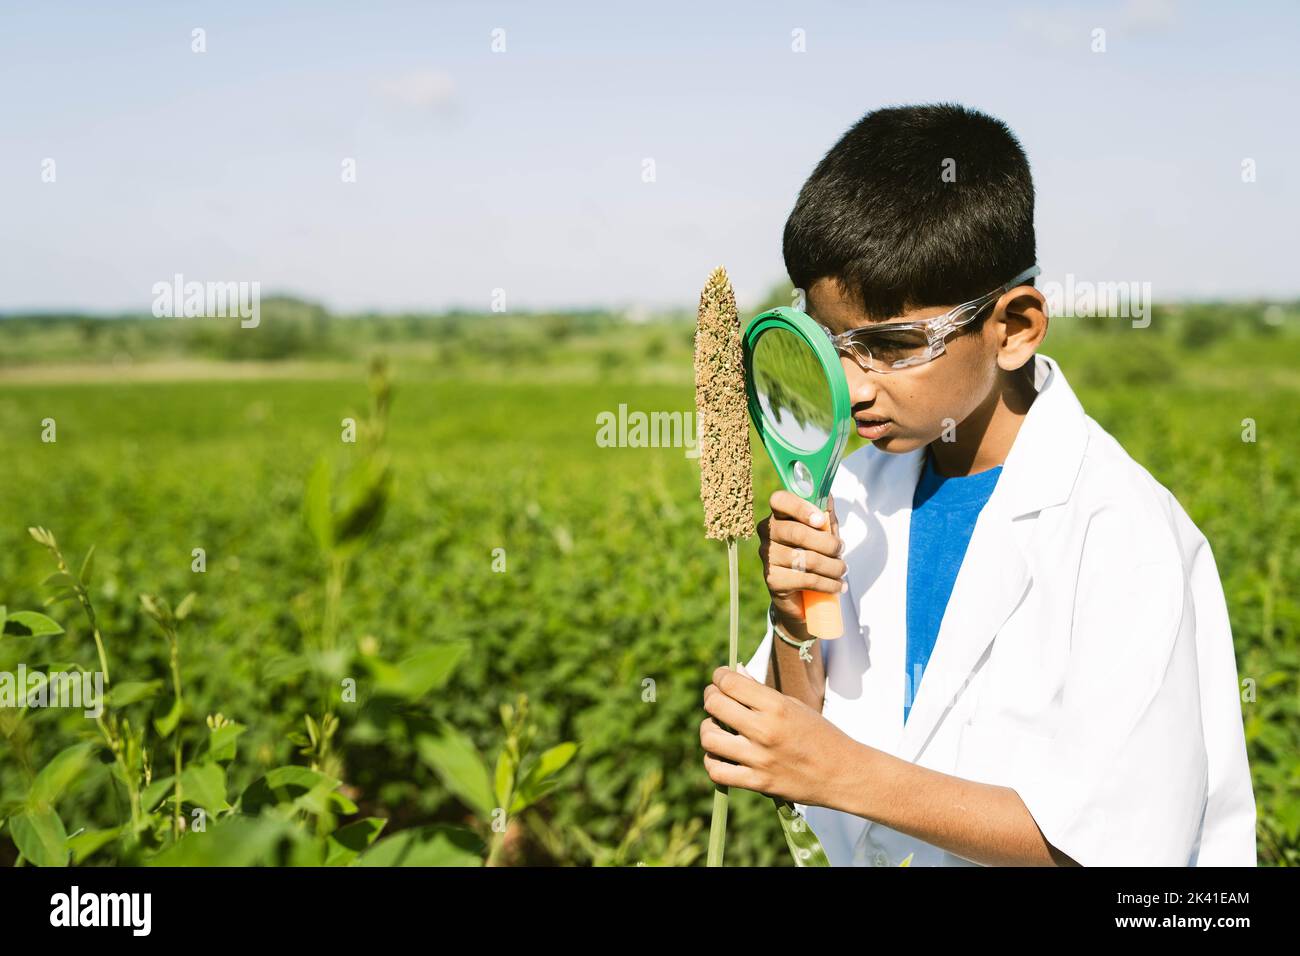 smart indian kid observing or checking virus on plant using magnifier lens at agricultural filed - concept of biotechnogy, professional activity. Stock Photo